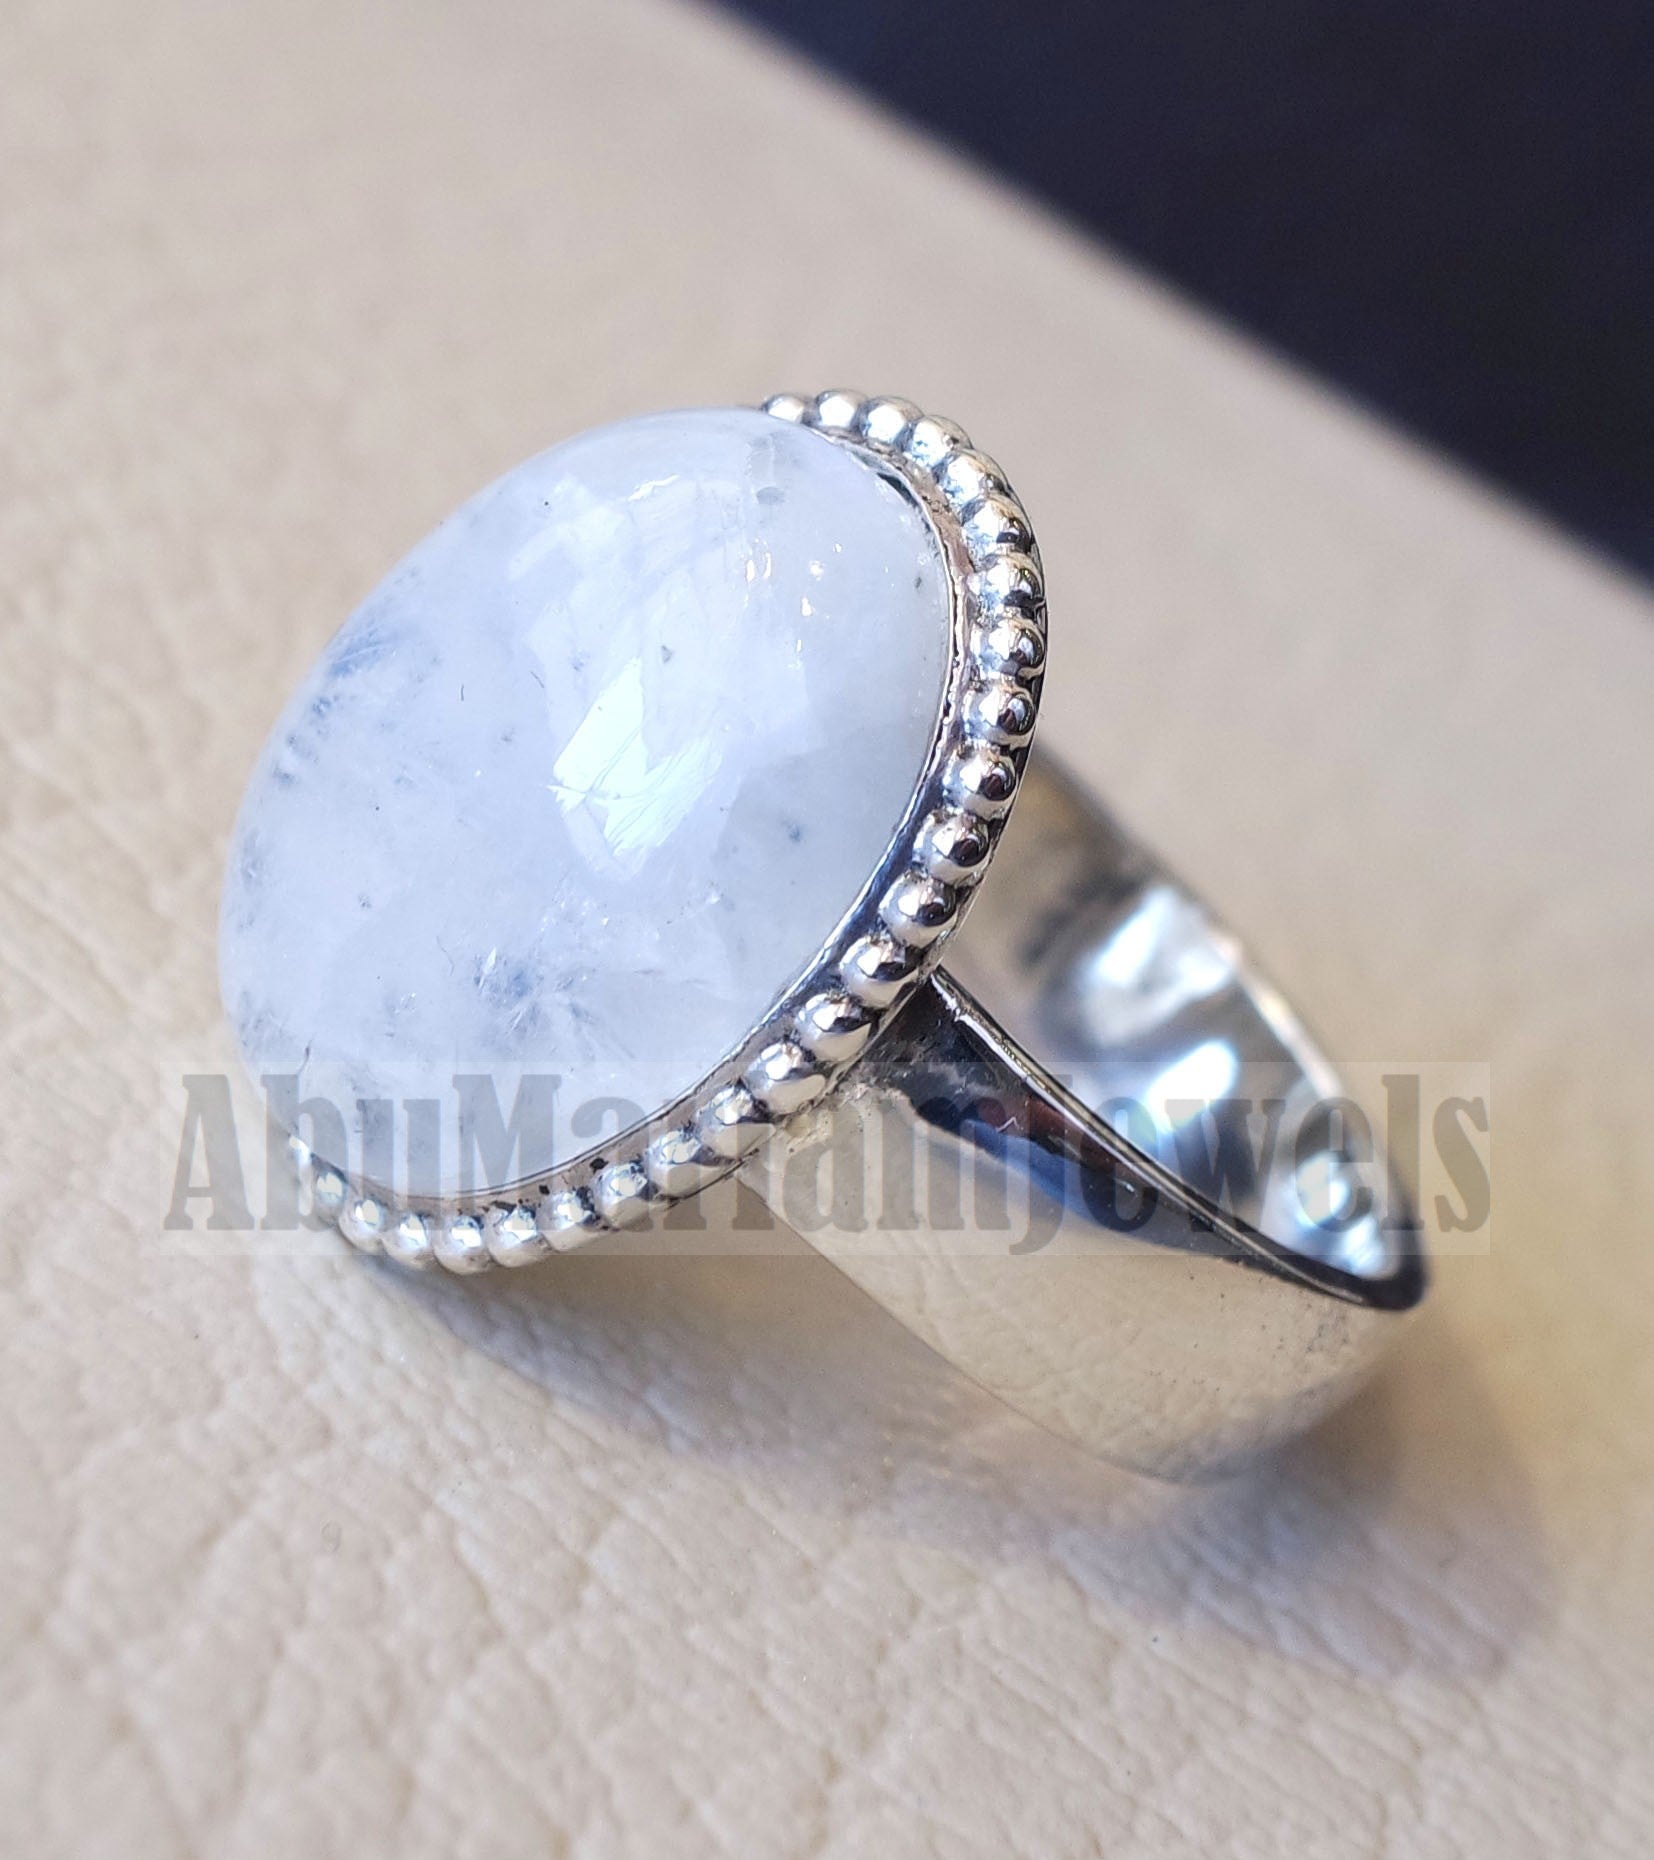 Pinkie men or women ring moonstone skin touching stone sterling silver 925 all sizes high quality natural oval cabochon stone